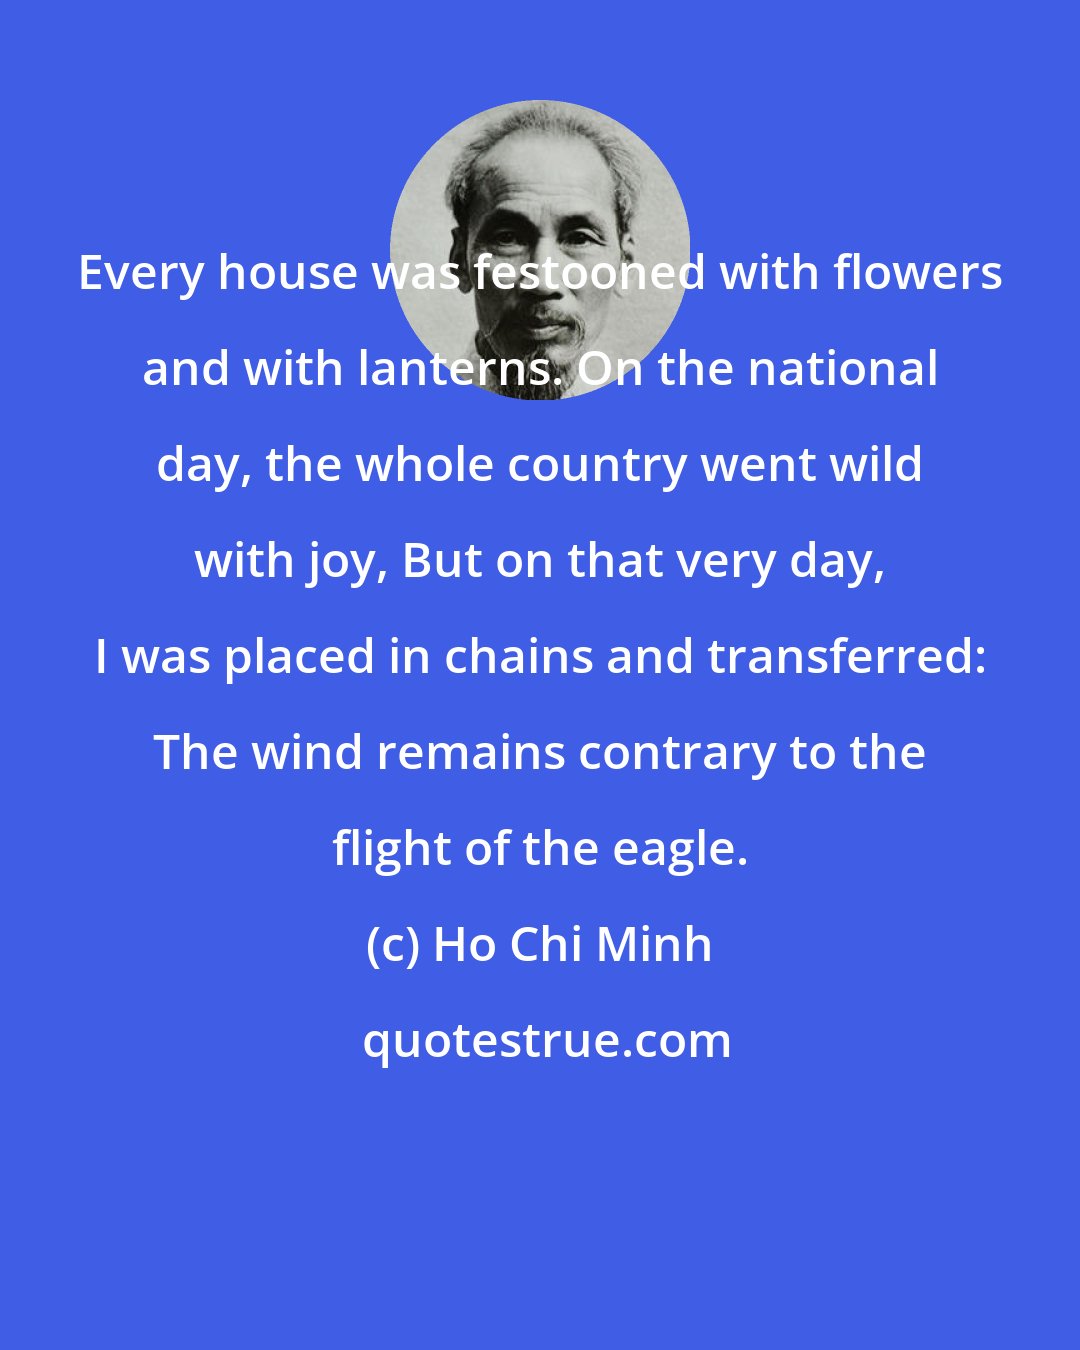 Ho Chi Minh: Every house was festooned with flowers and with lanterns. On the national day, the whole country went wild with joy, But on that very day, I was placed in chains and transferred: The wind remains contrary to the flight of the eagle.